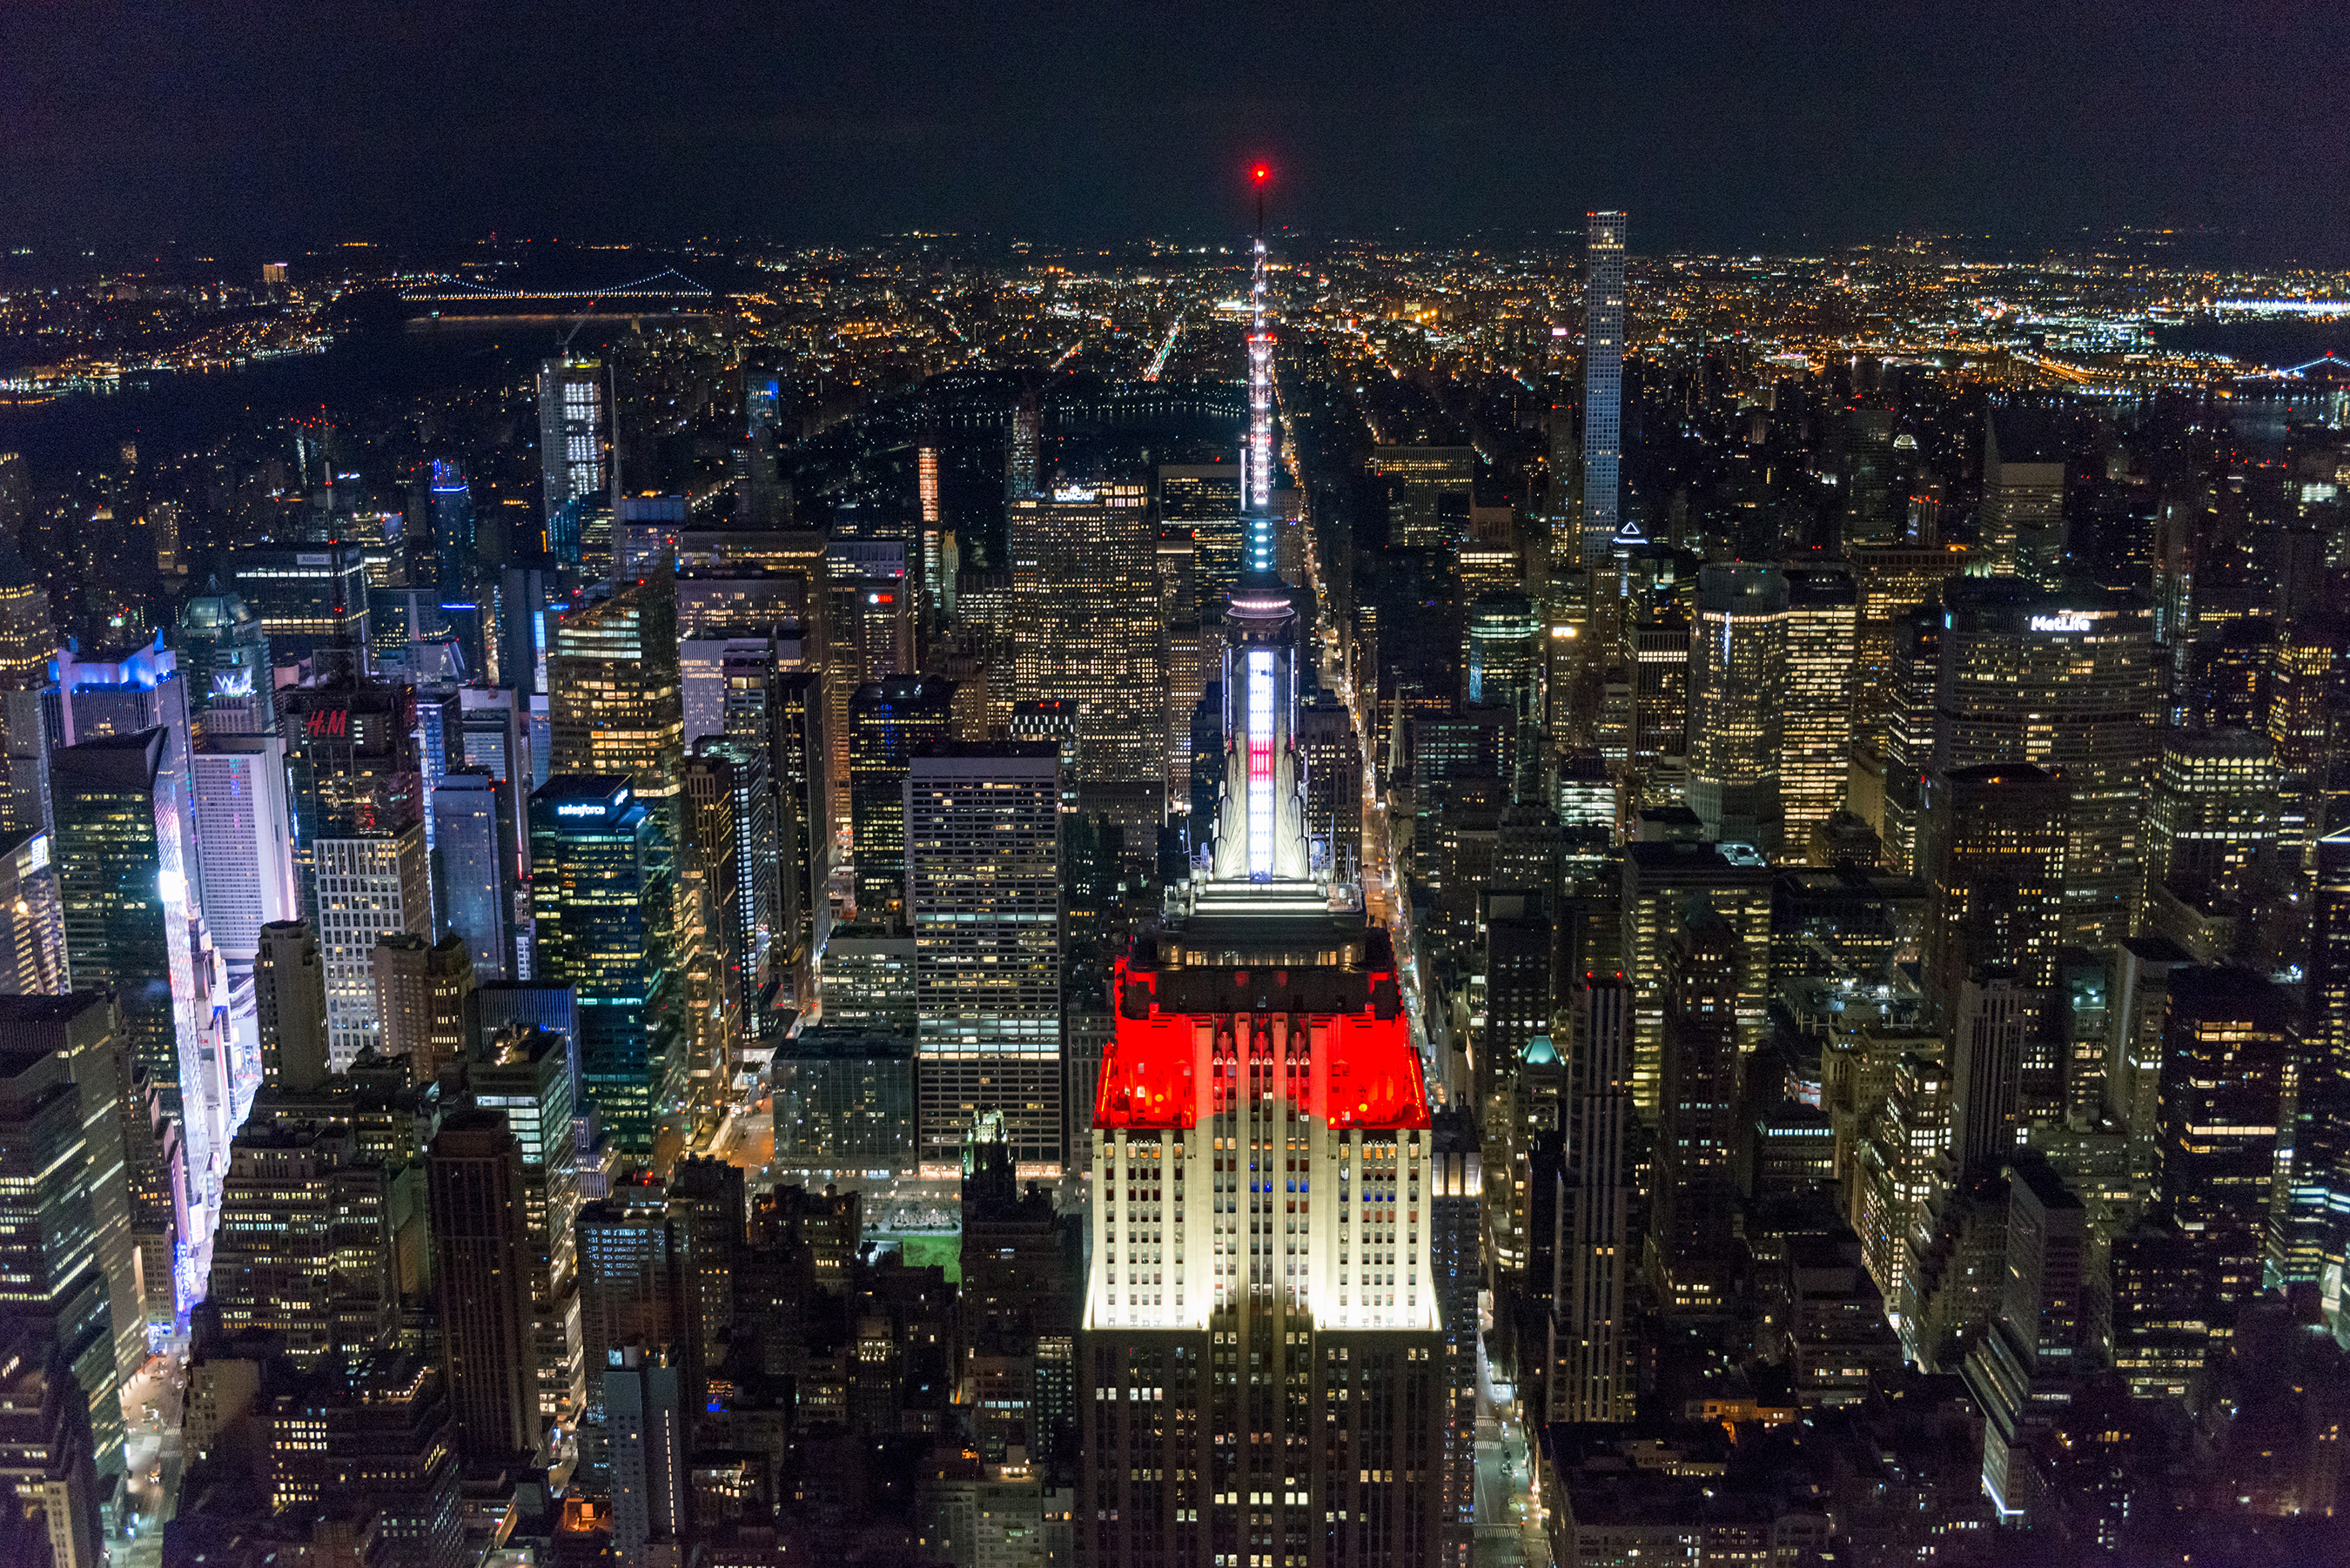 The Empire State Building shines for England in honor of the 2018 World Cup